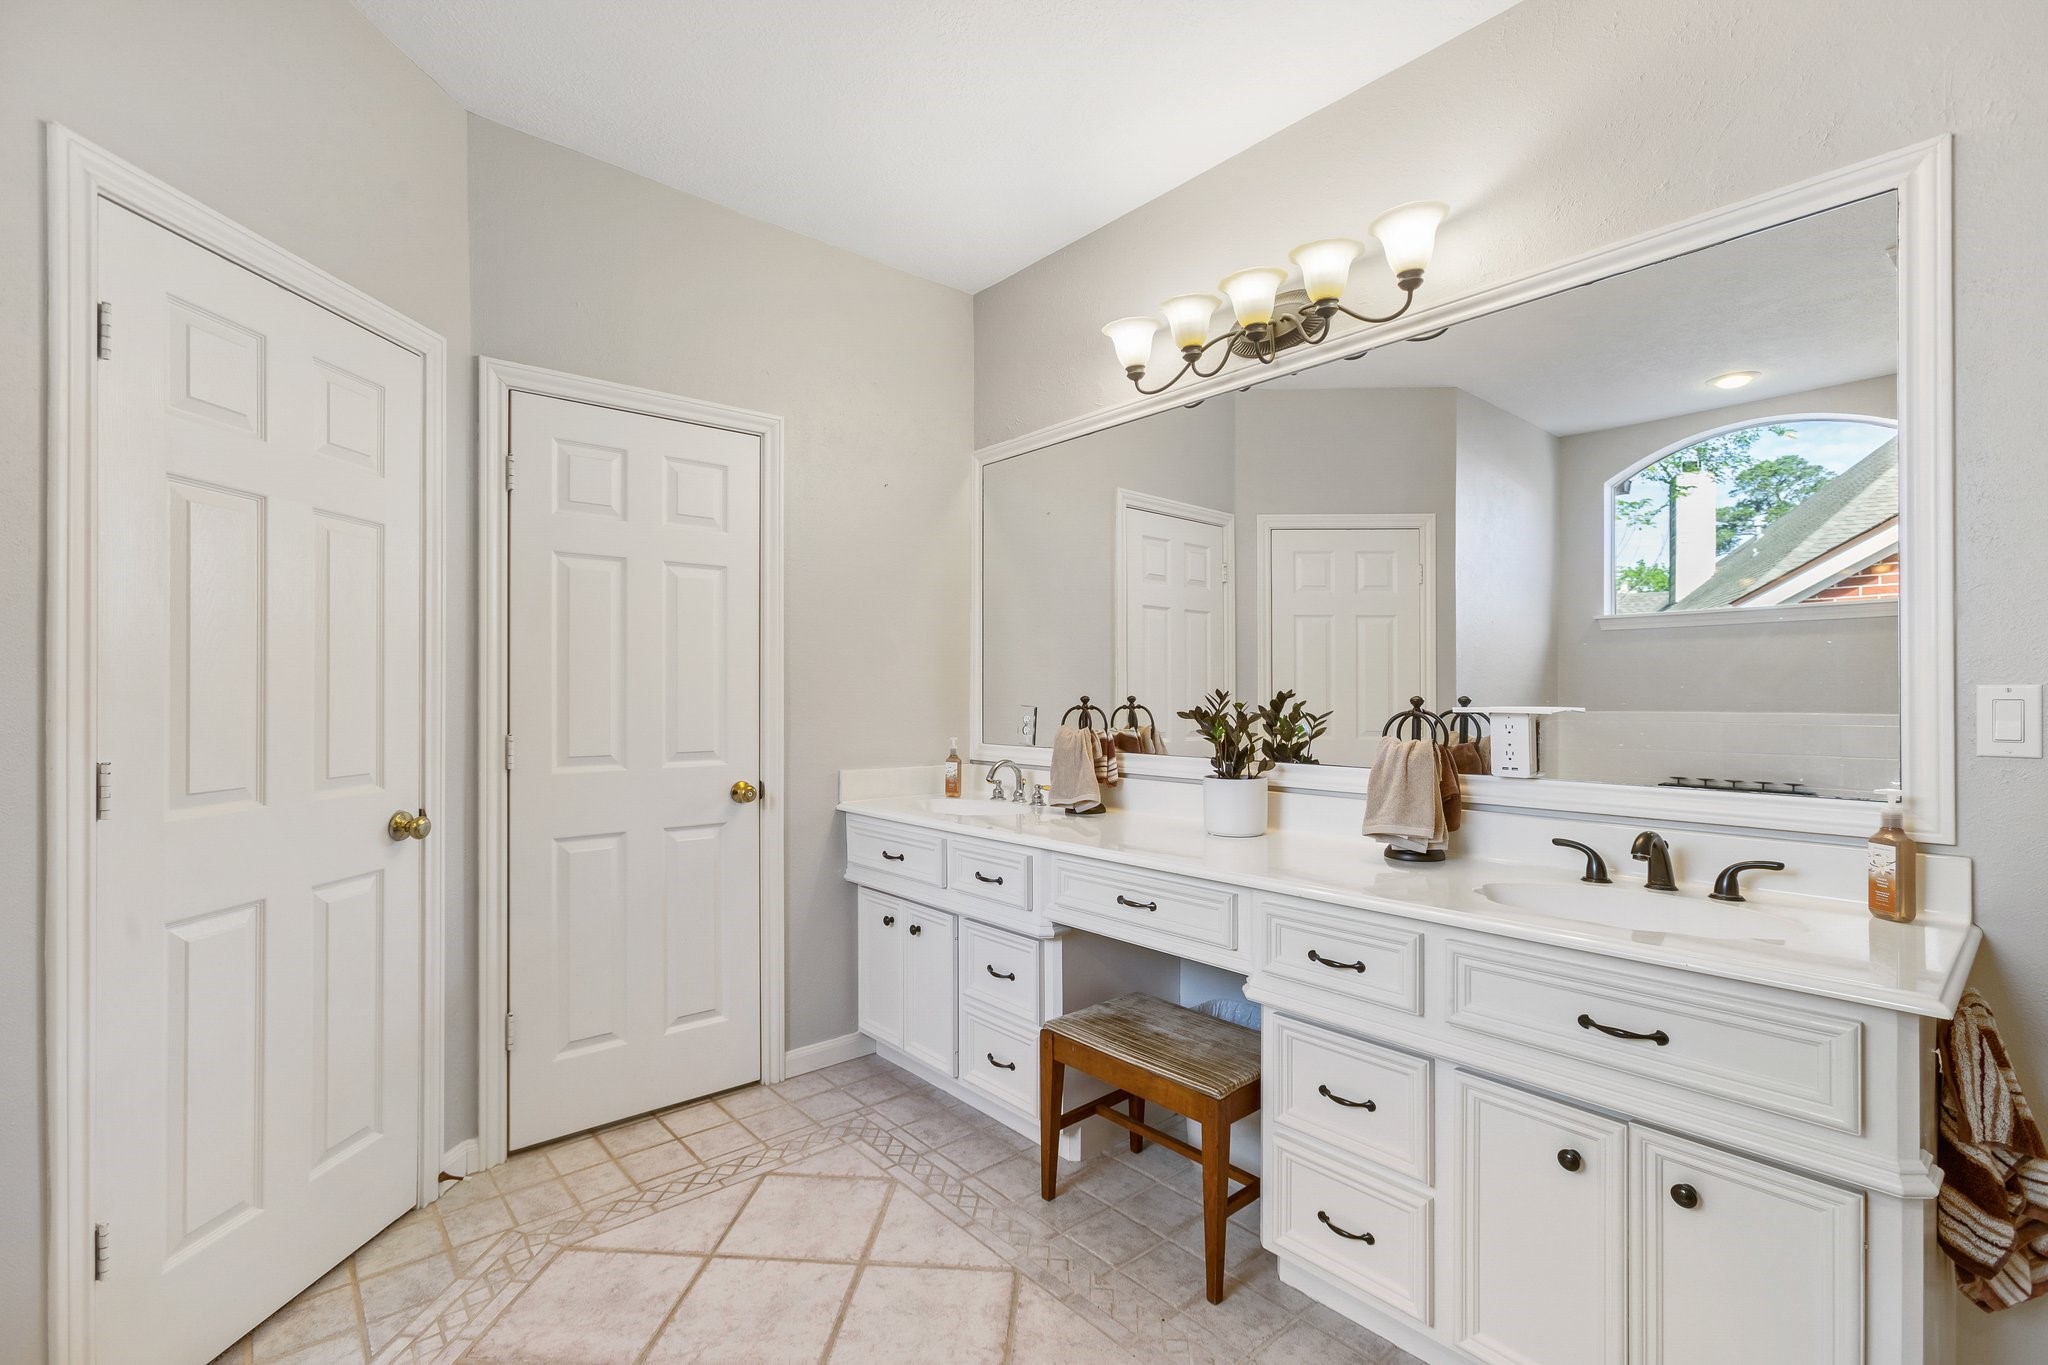 Primary bathroom features dual sinks and vanity - If you have additional questions regarding 190 Park Way  in Montgomery or would like to tour the property with us call 800-660-1022 and reference MLS# 70087213.